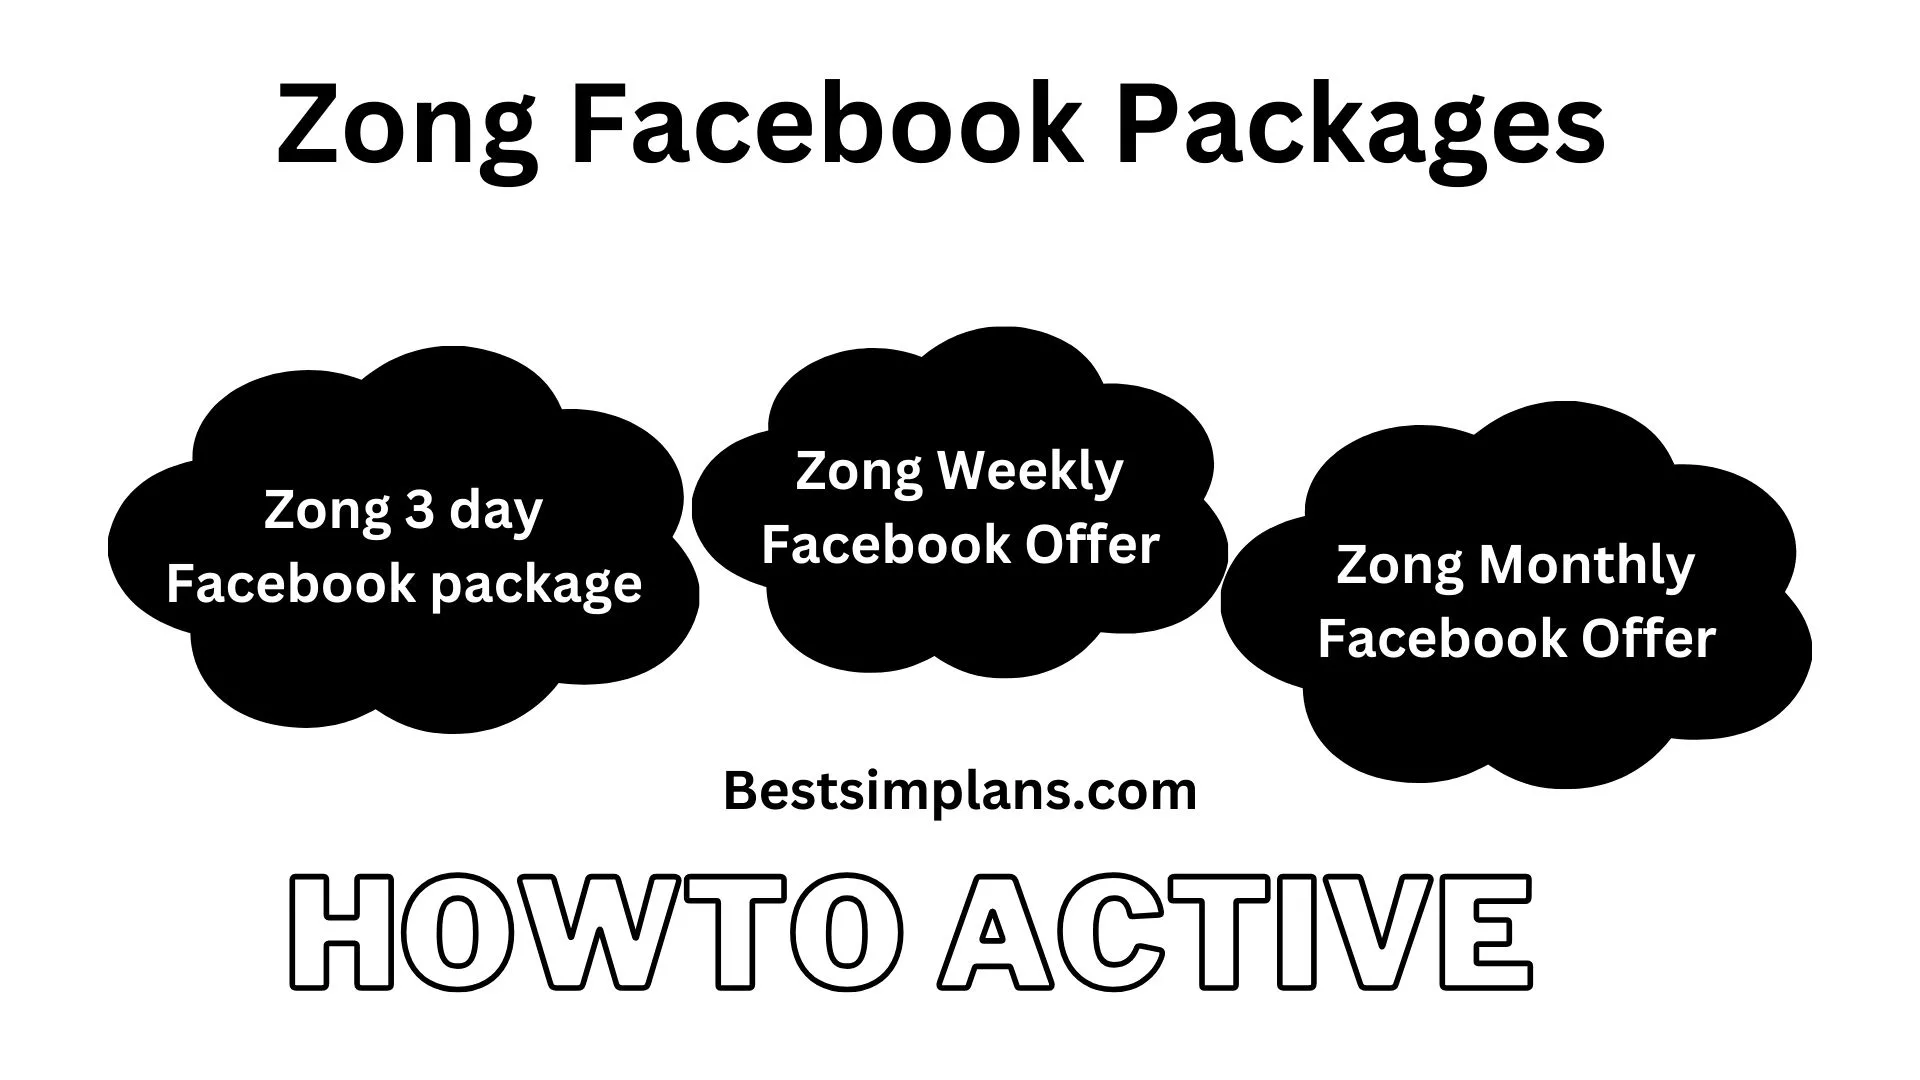 Zong YouTube Packages 1 Day, 3 Days, 7 Days, and 30 Days